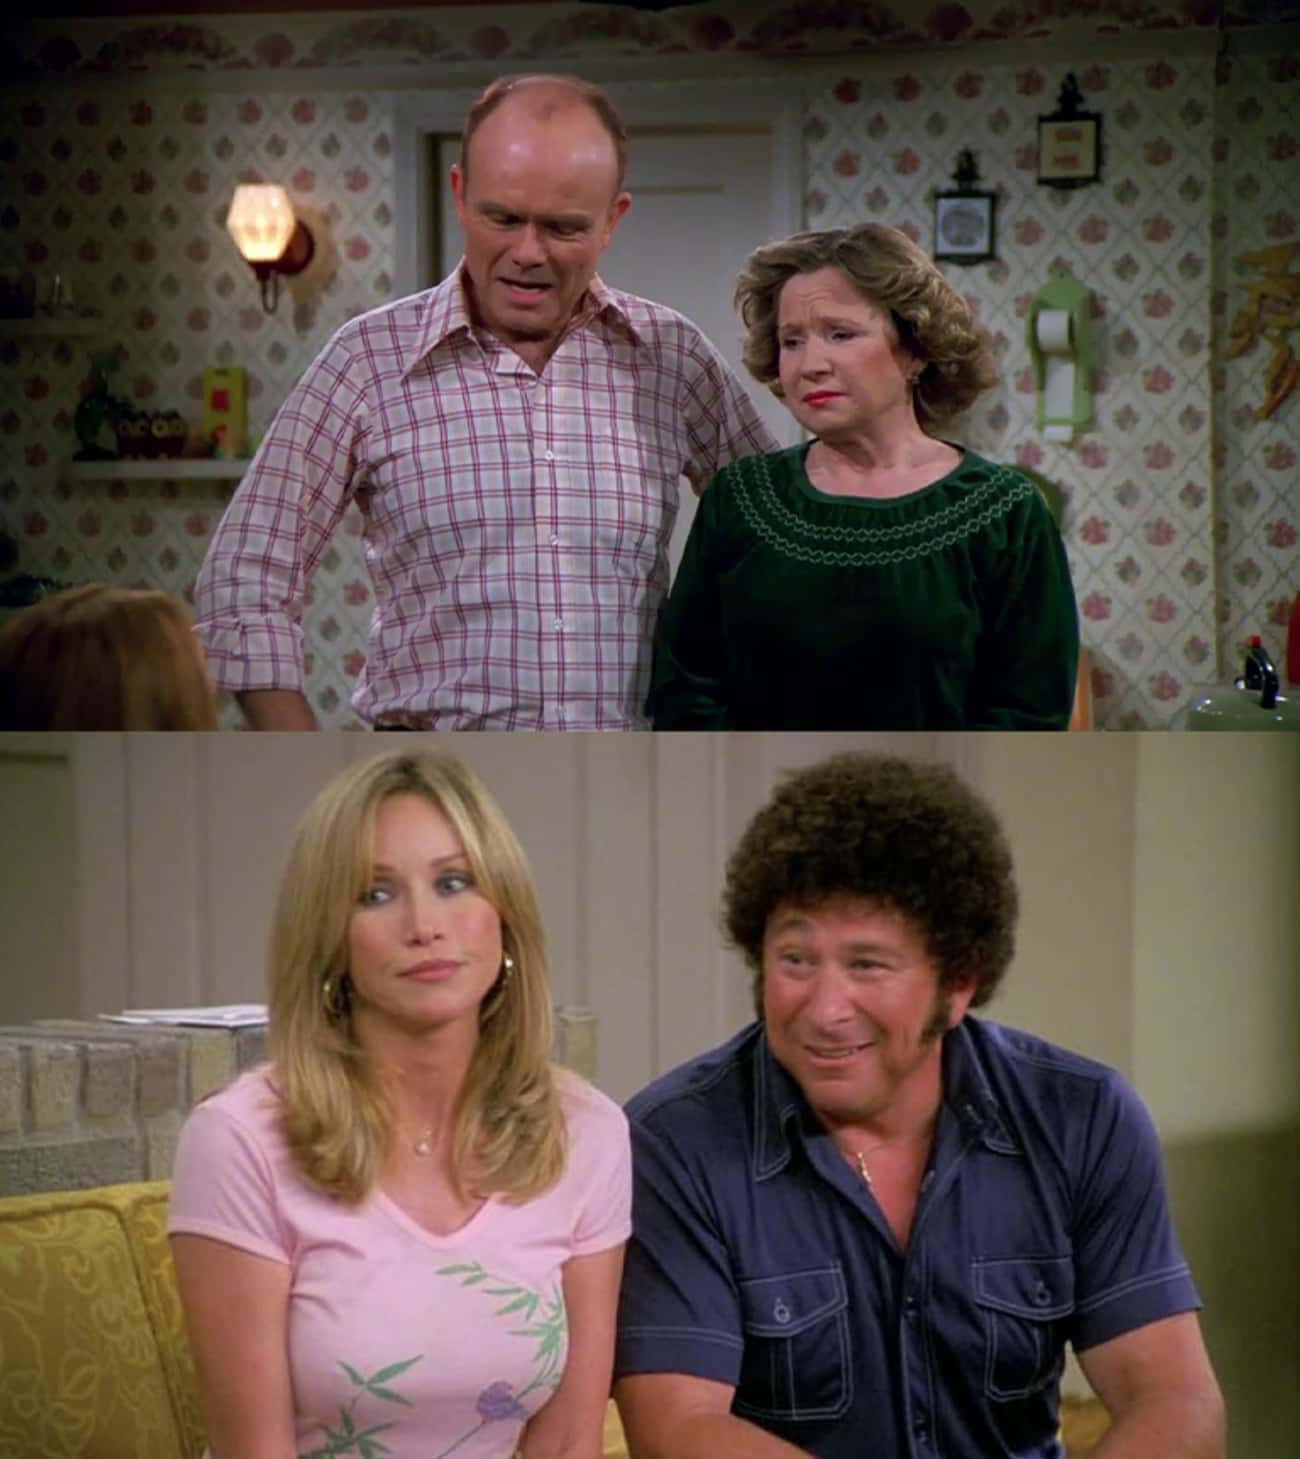 The Differences Between The Two Main Parents Is To Juxtapose Sitcom Cliches With Reality